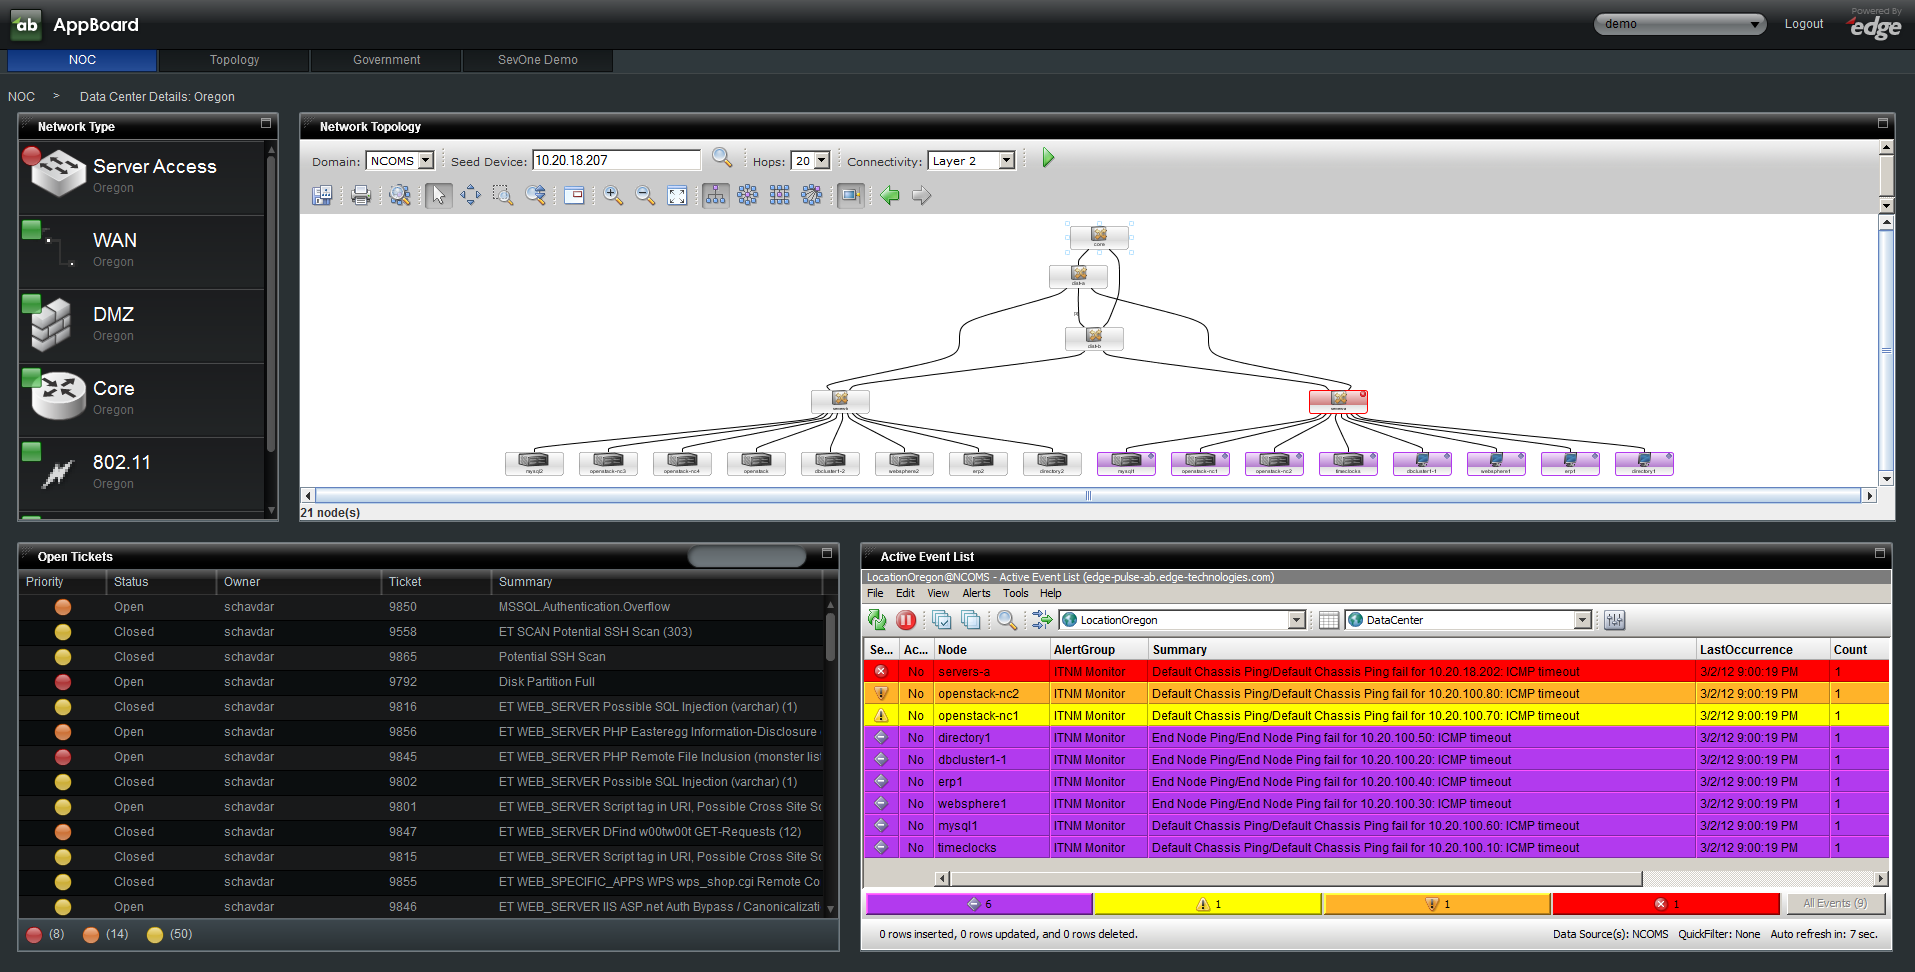 Appboard-2.4-launch-url-topology.png